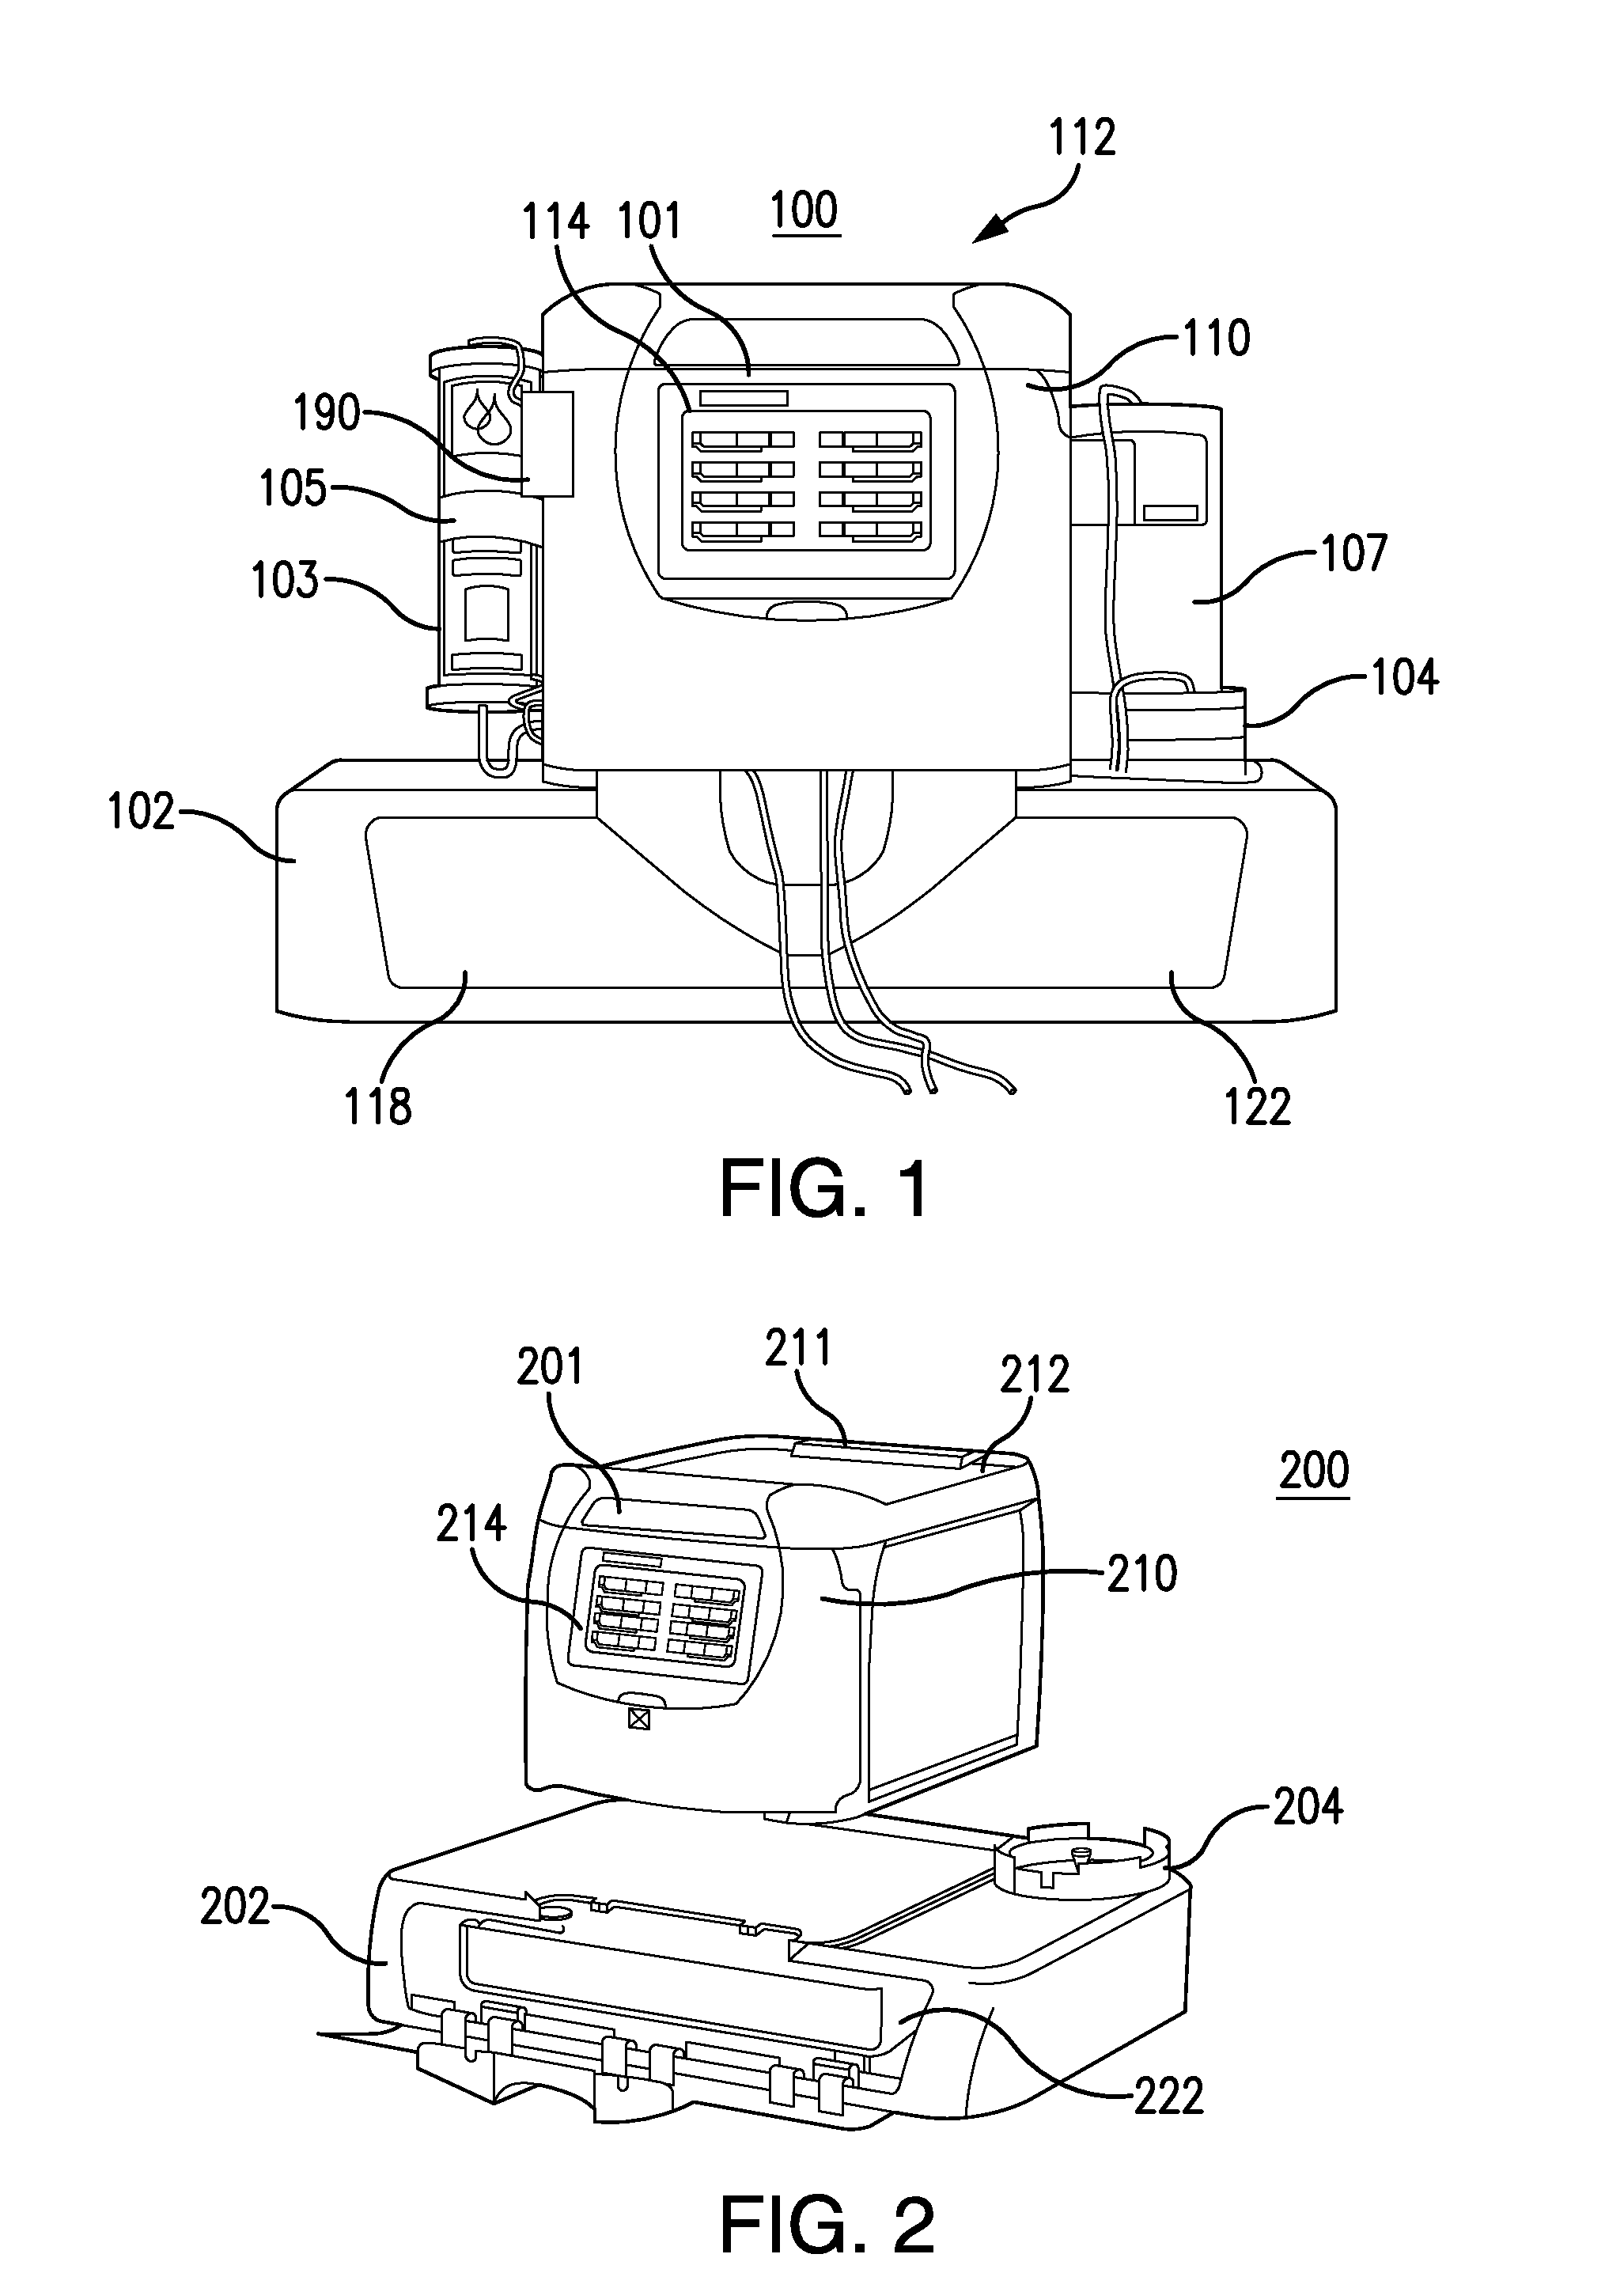 Universal portable artificial kidney for hemodialysis and peritoneal dialysis